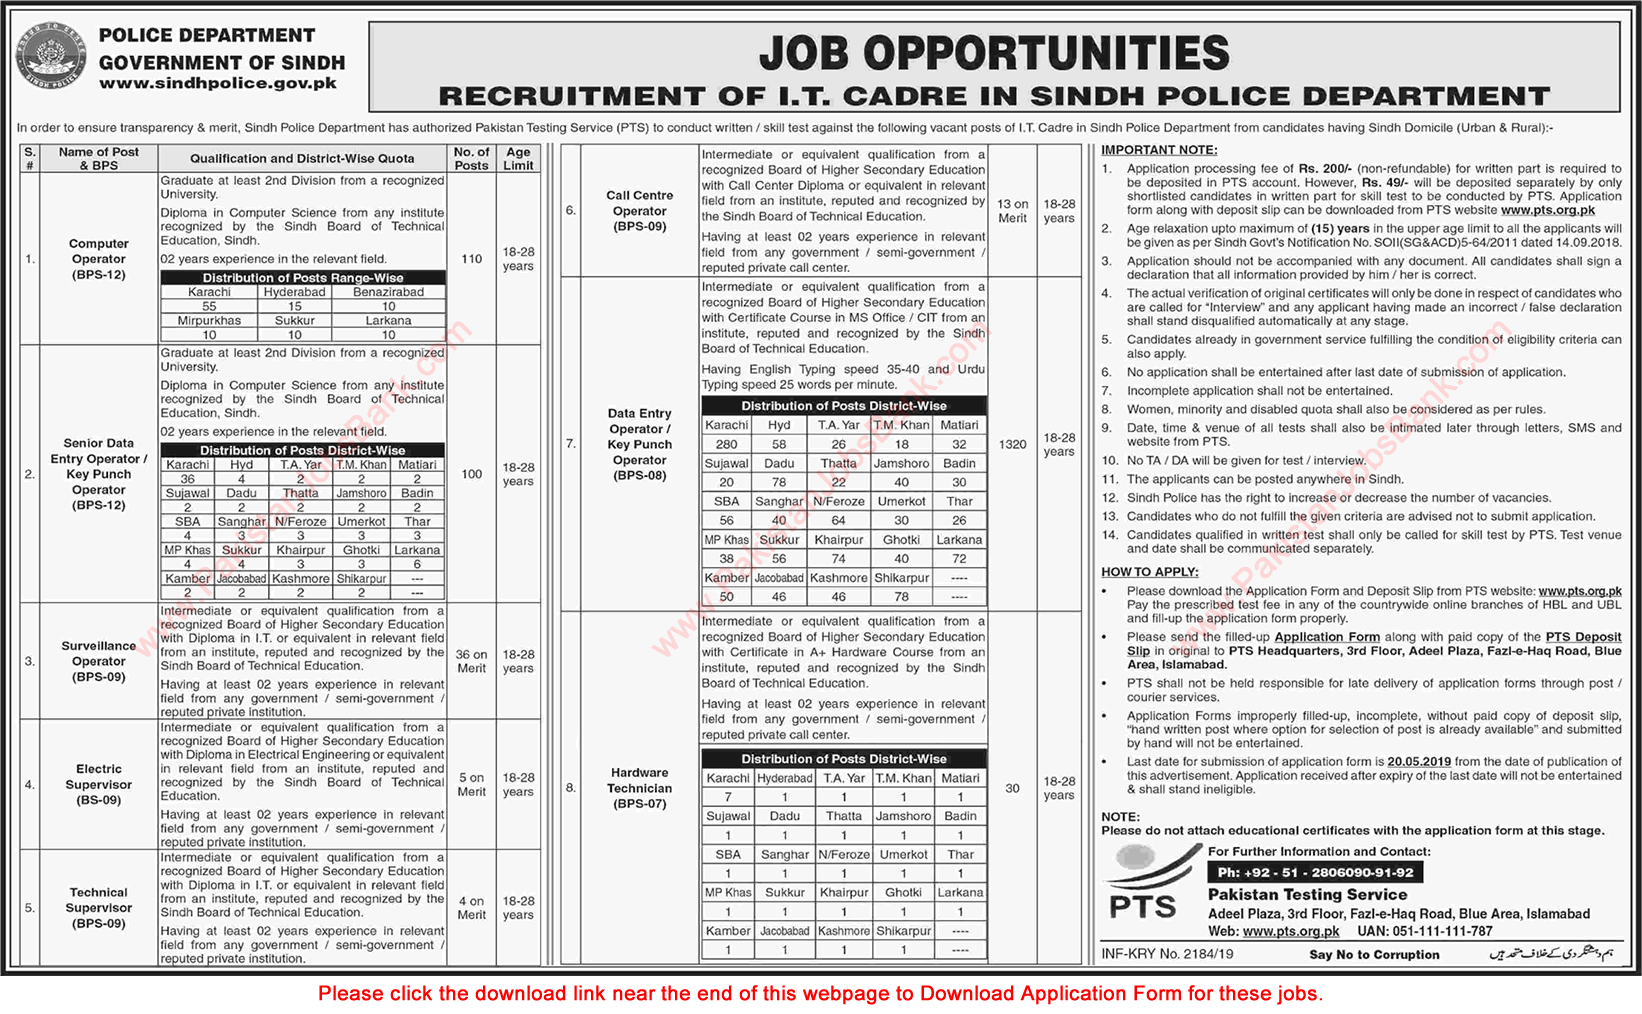 Sindh Police Jobs April / May 2019 PTS Application Form Computer / Data Entry Operators & Others Latest